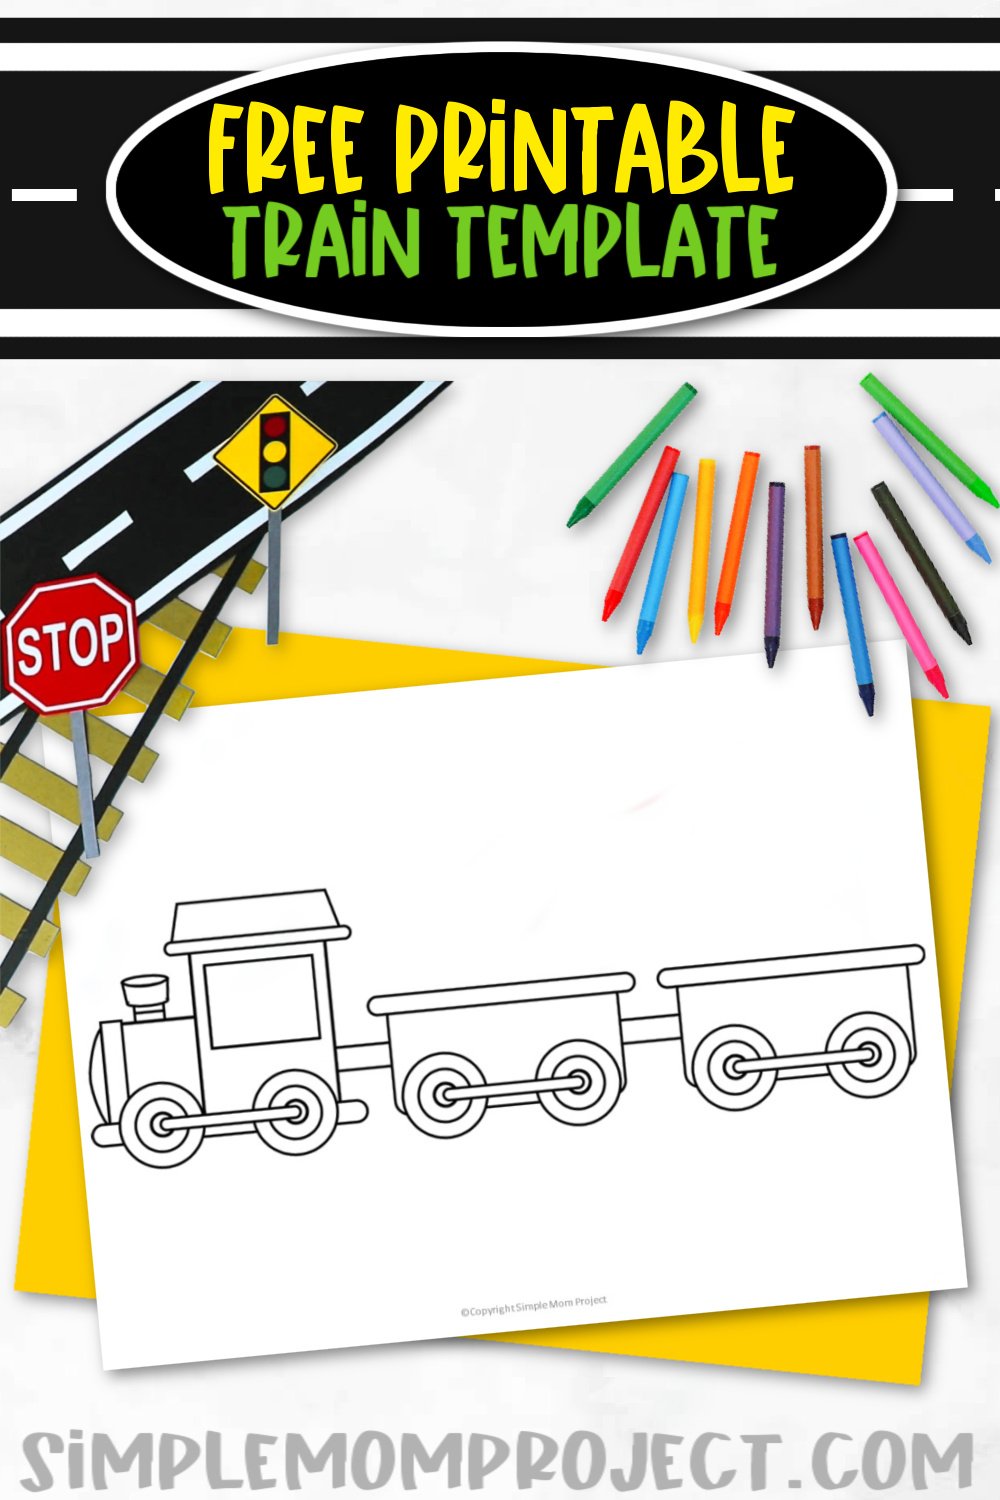 Free printable train template â simple mom project